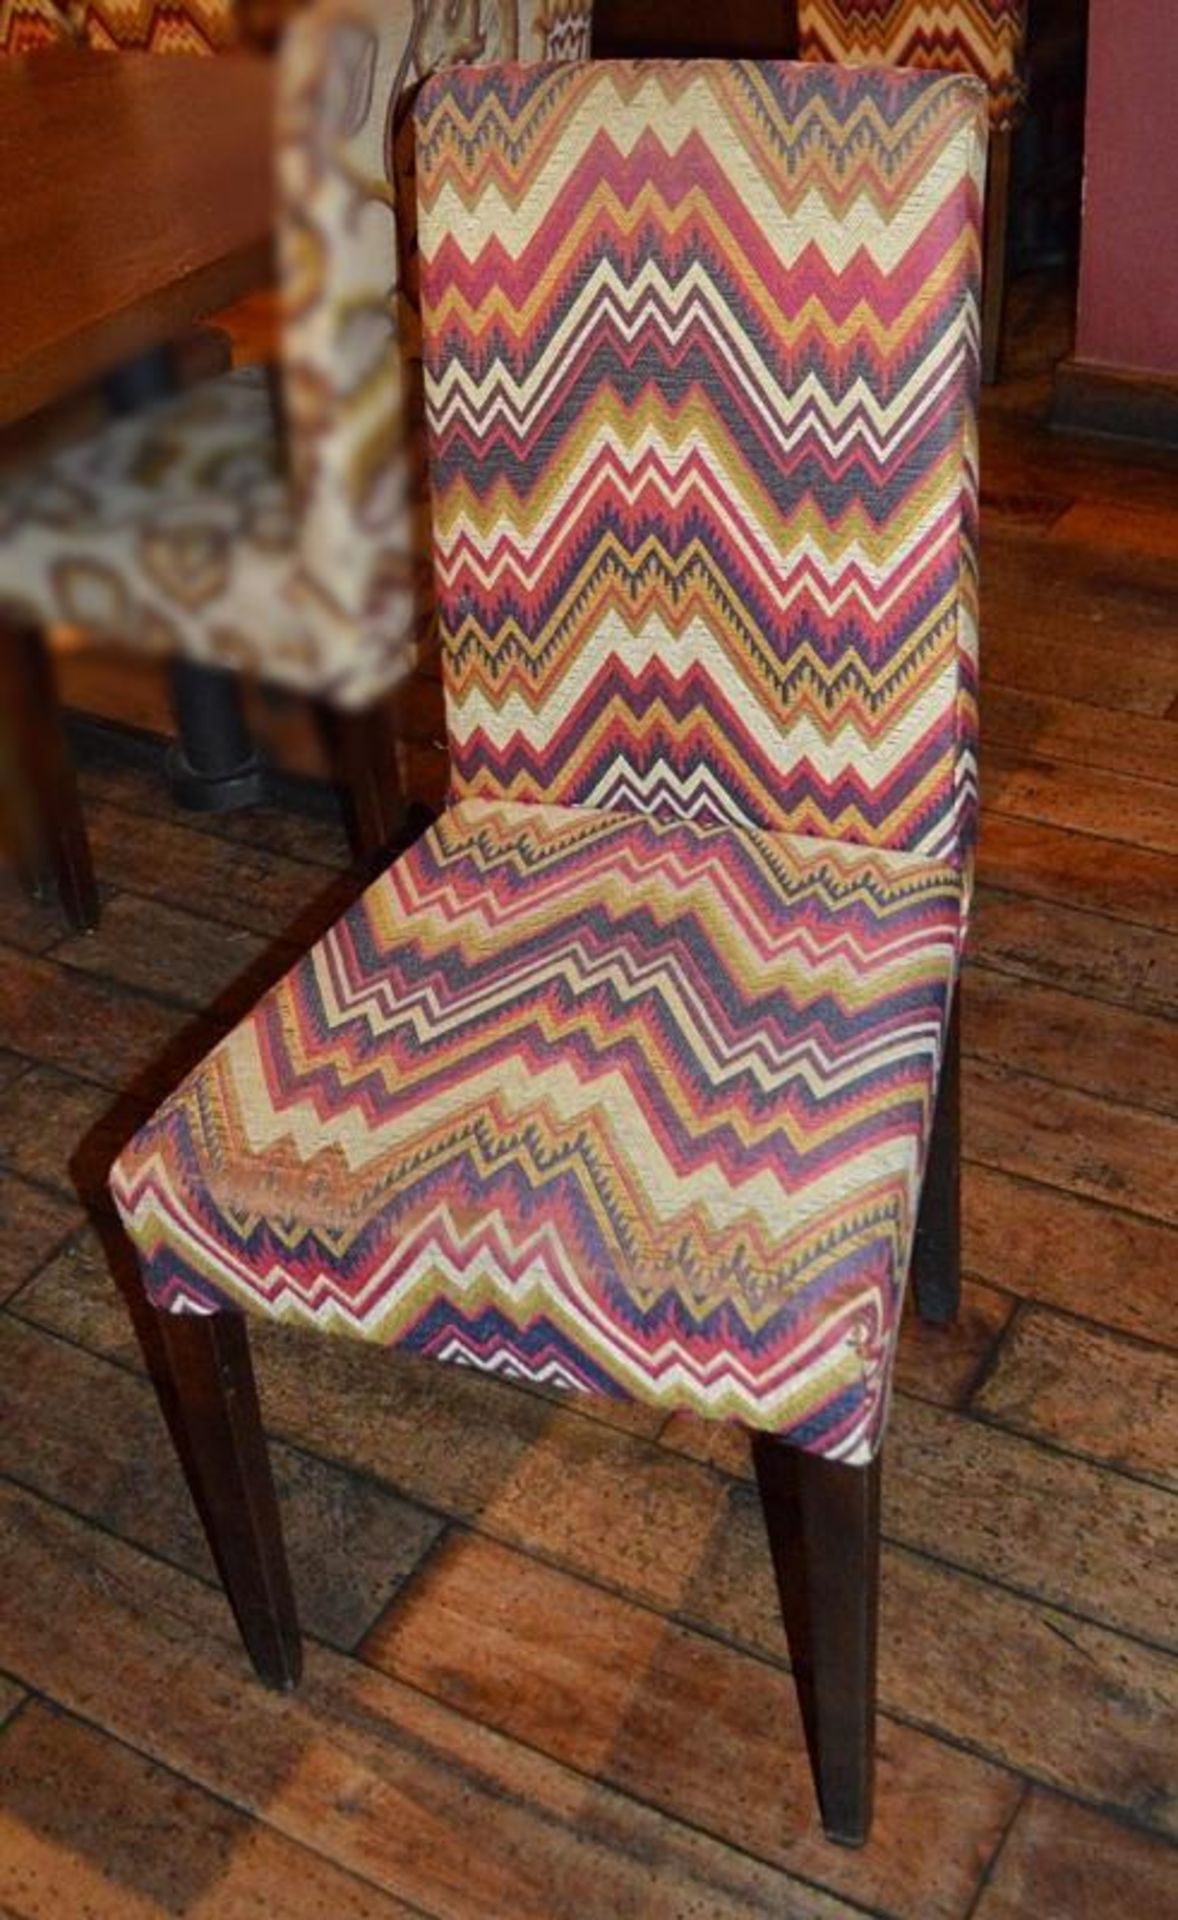 6 x Upholstered Restaurant Dining Chairs In A Zig-Zag Mexican-style Fabric - Dimensions (approx): H9